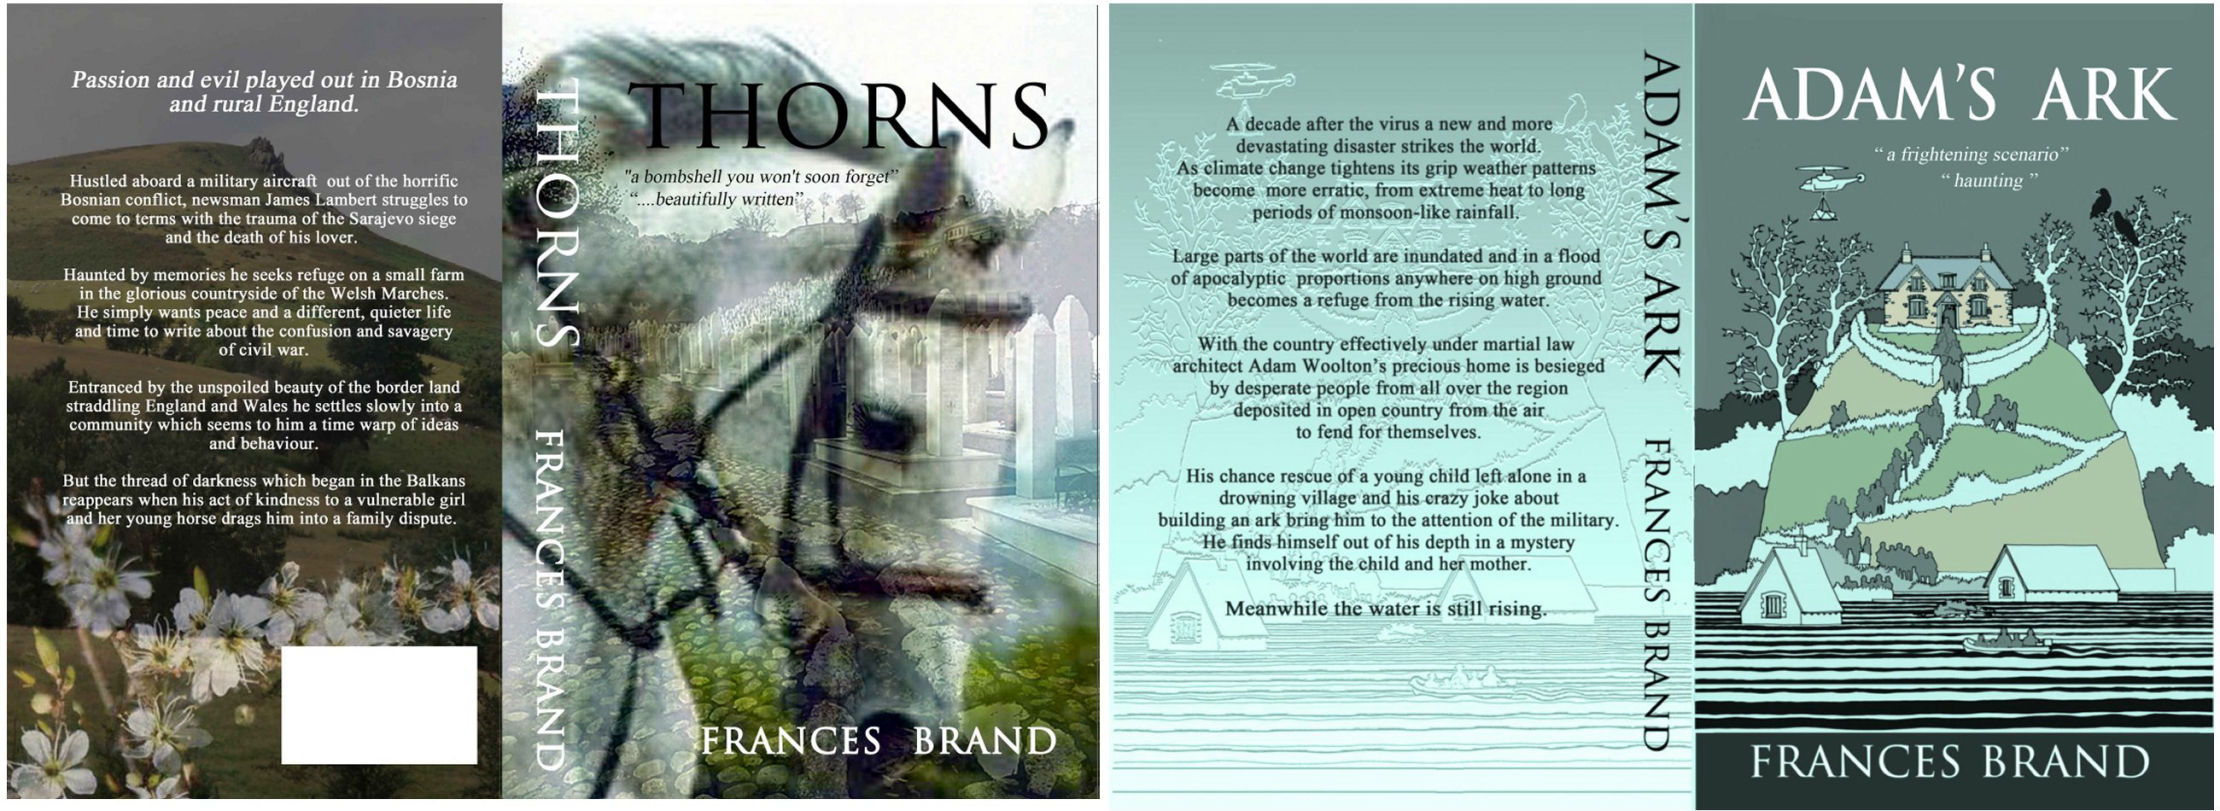 Thorns and Adam's Ark by Frances Brand